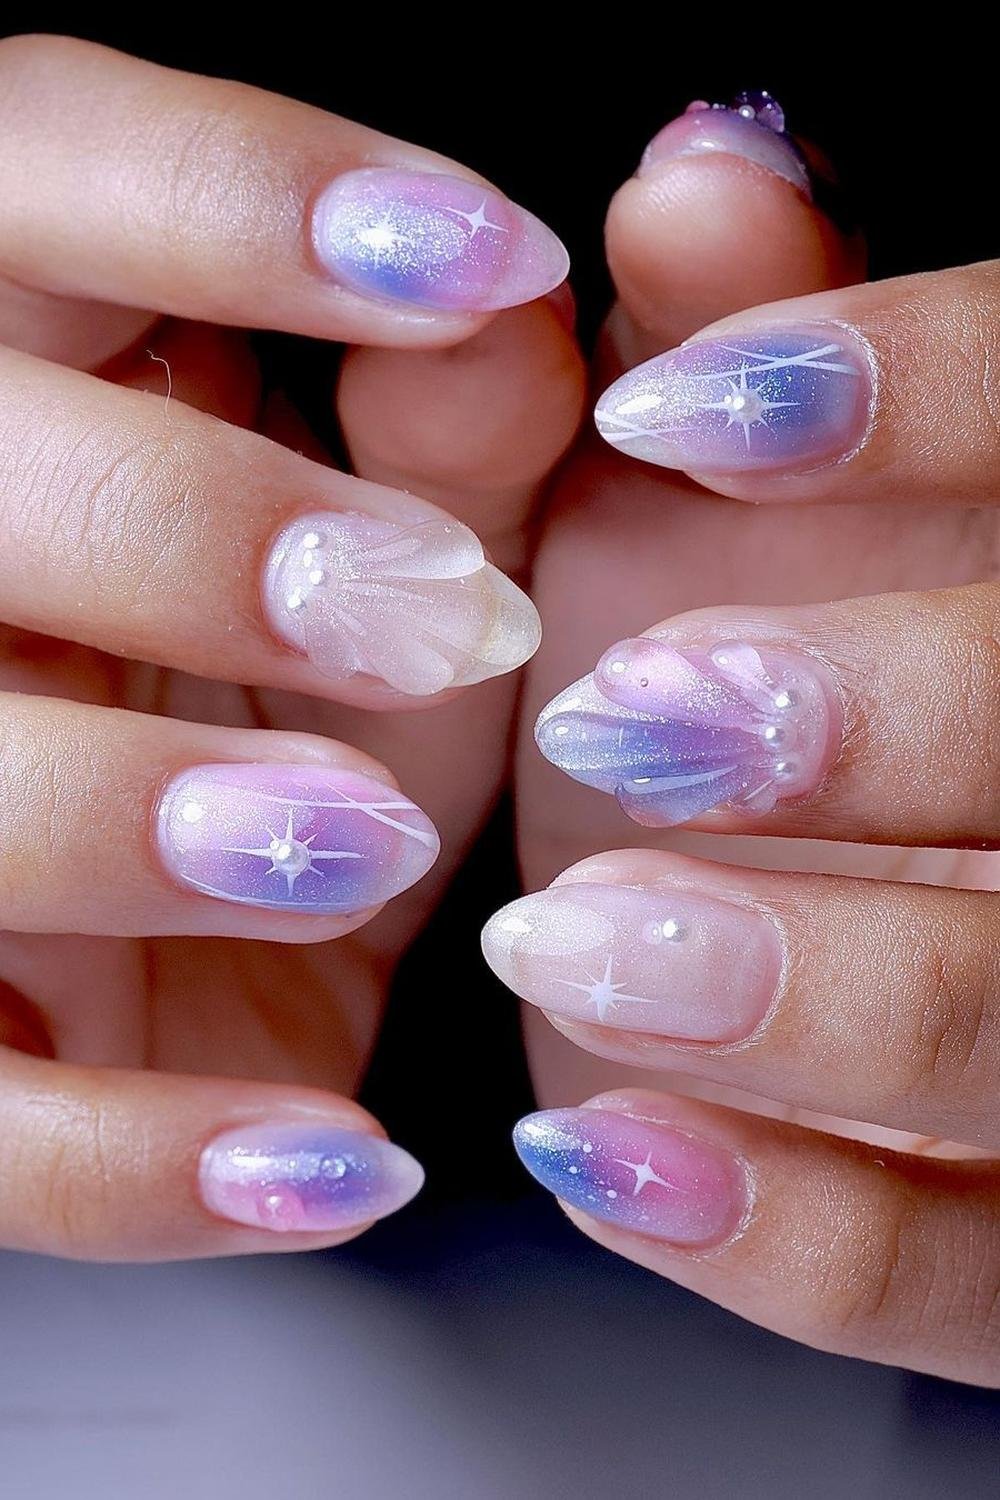 7 - Picture of Mermaid Nails